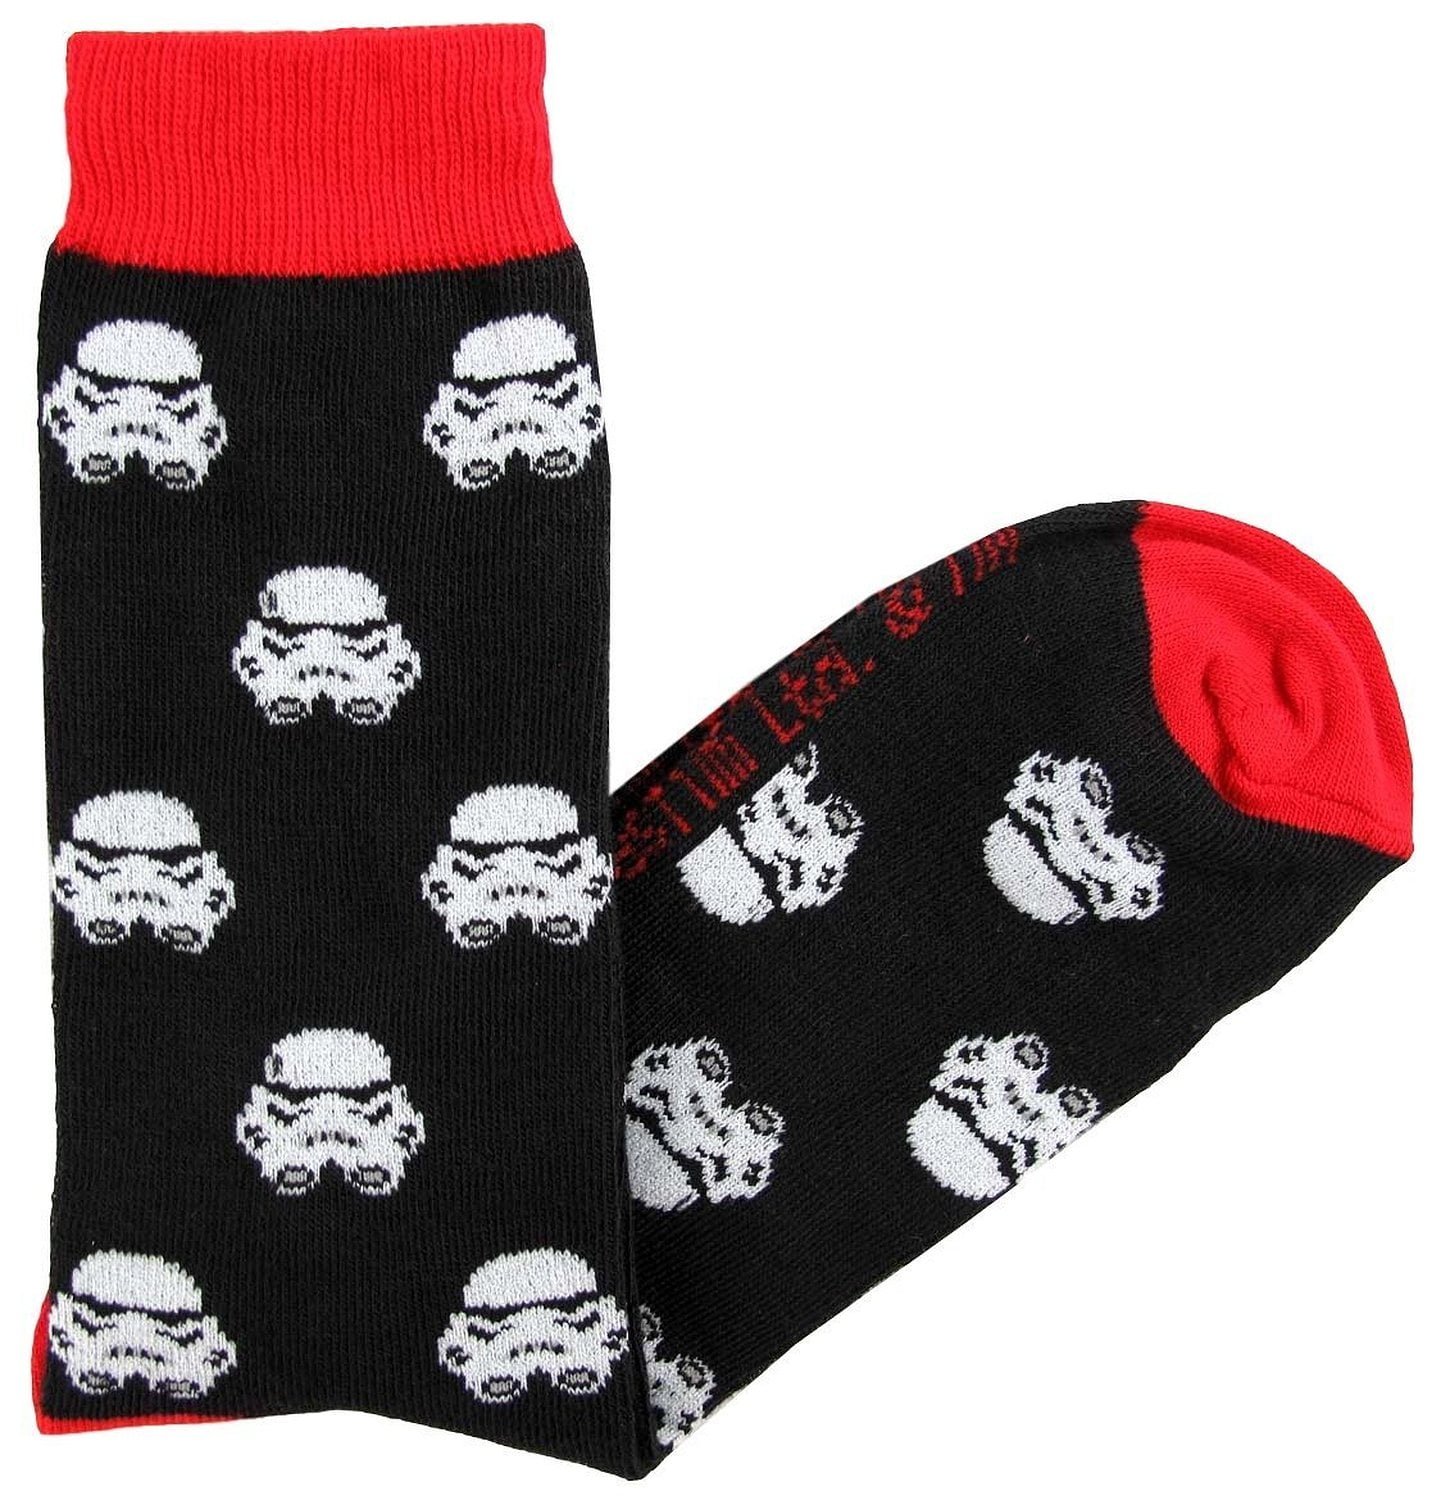 Mens Star Wars 12 Days of Socks Darth Vader and Stormtroopers for Shoe Size 6-12